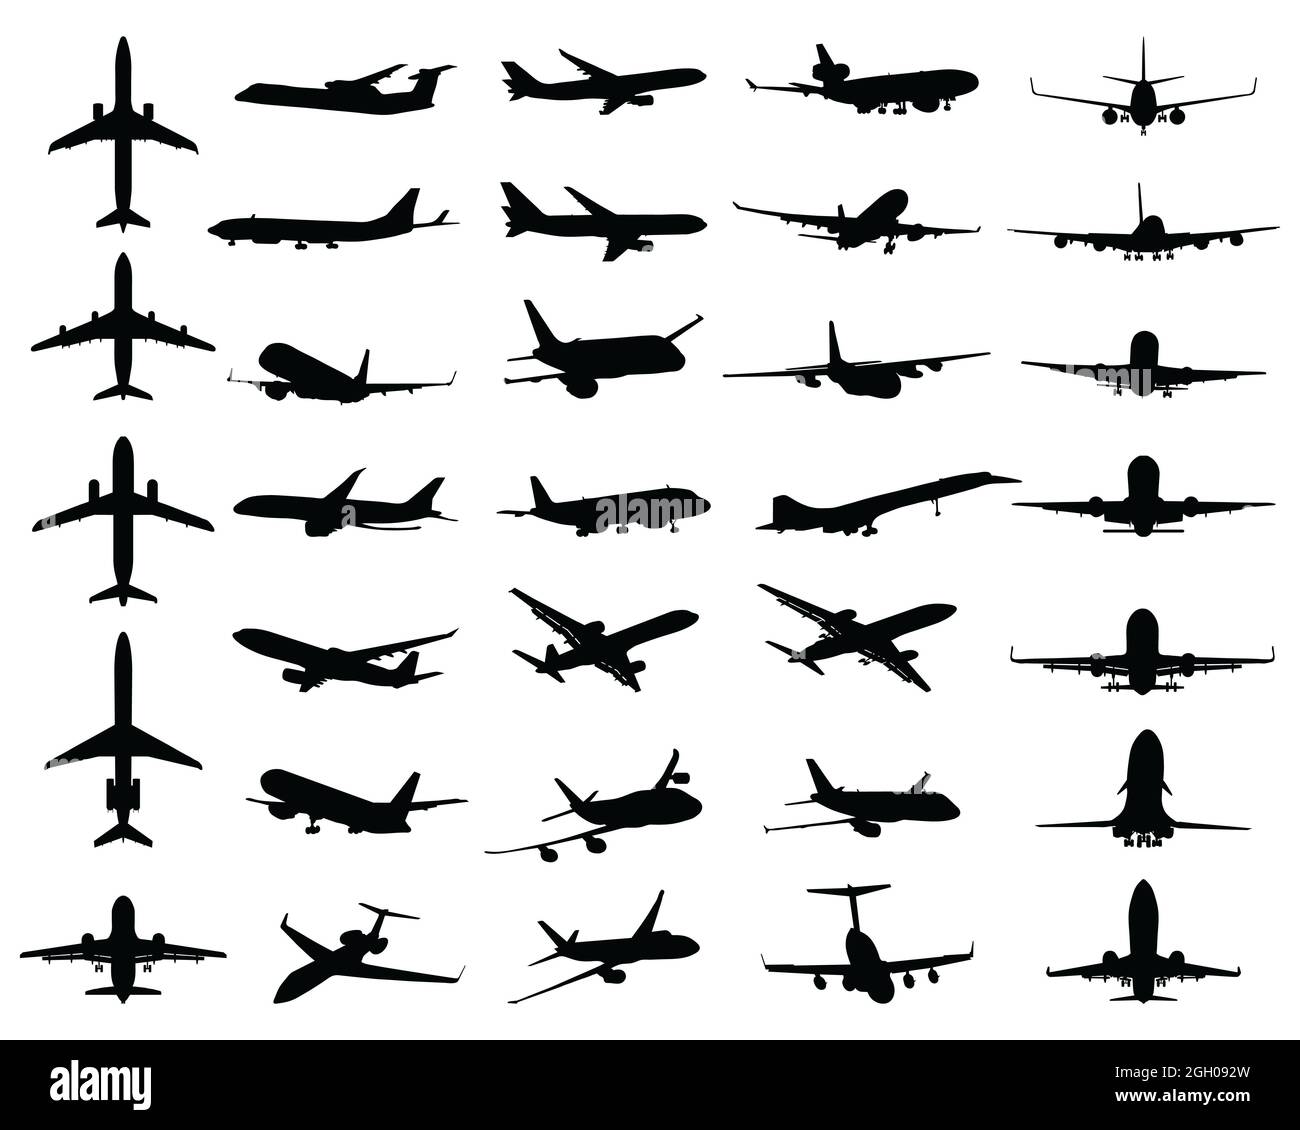 Black silhouettes of different aircrafts on a white background Stock Photo